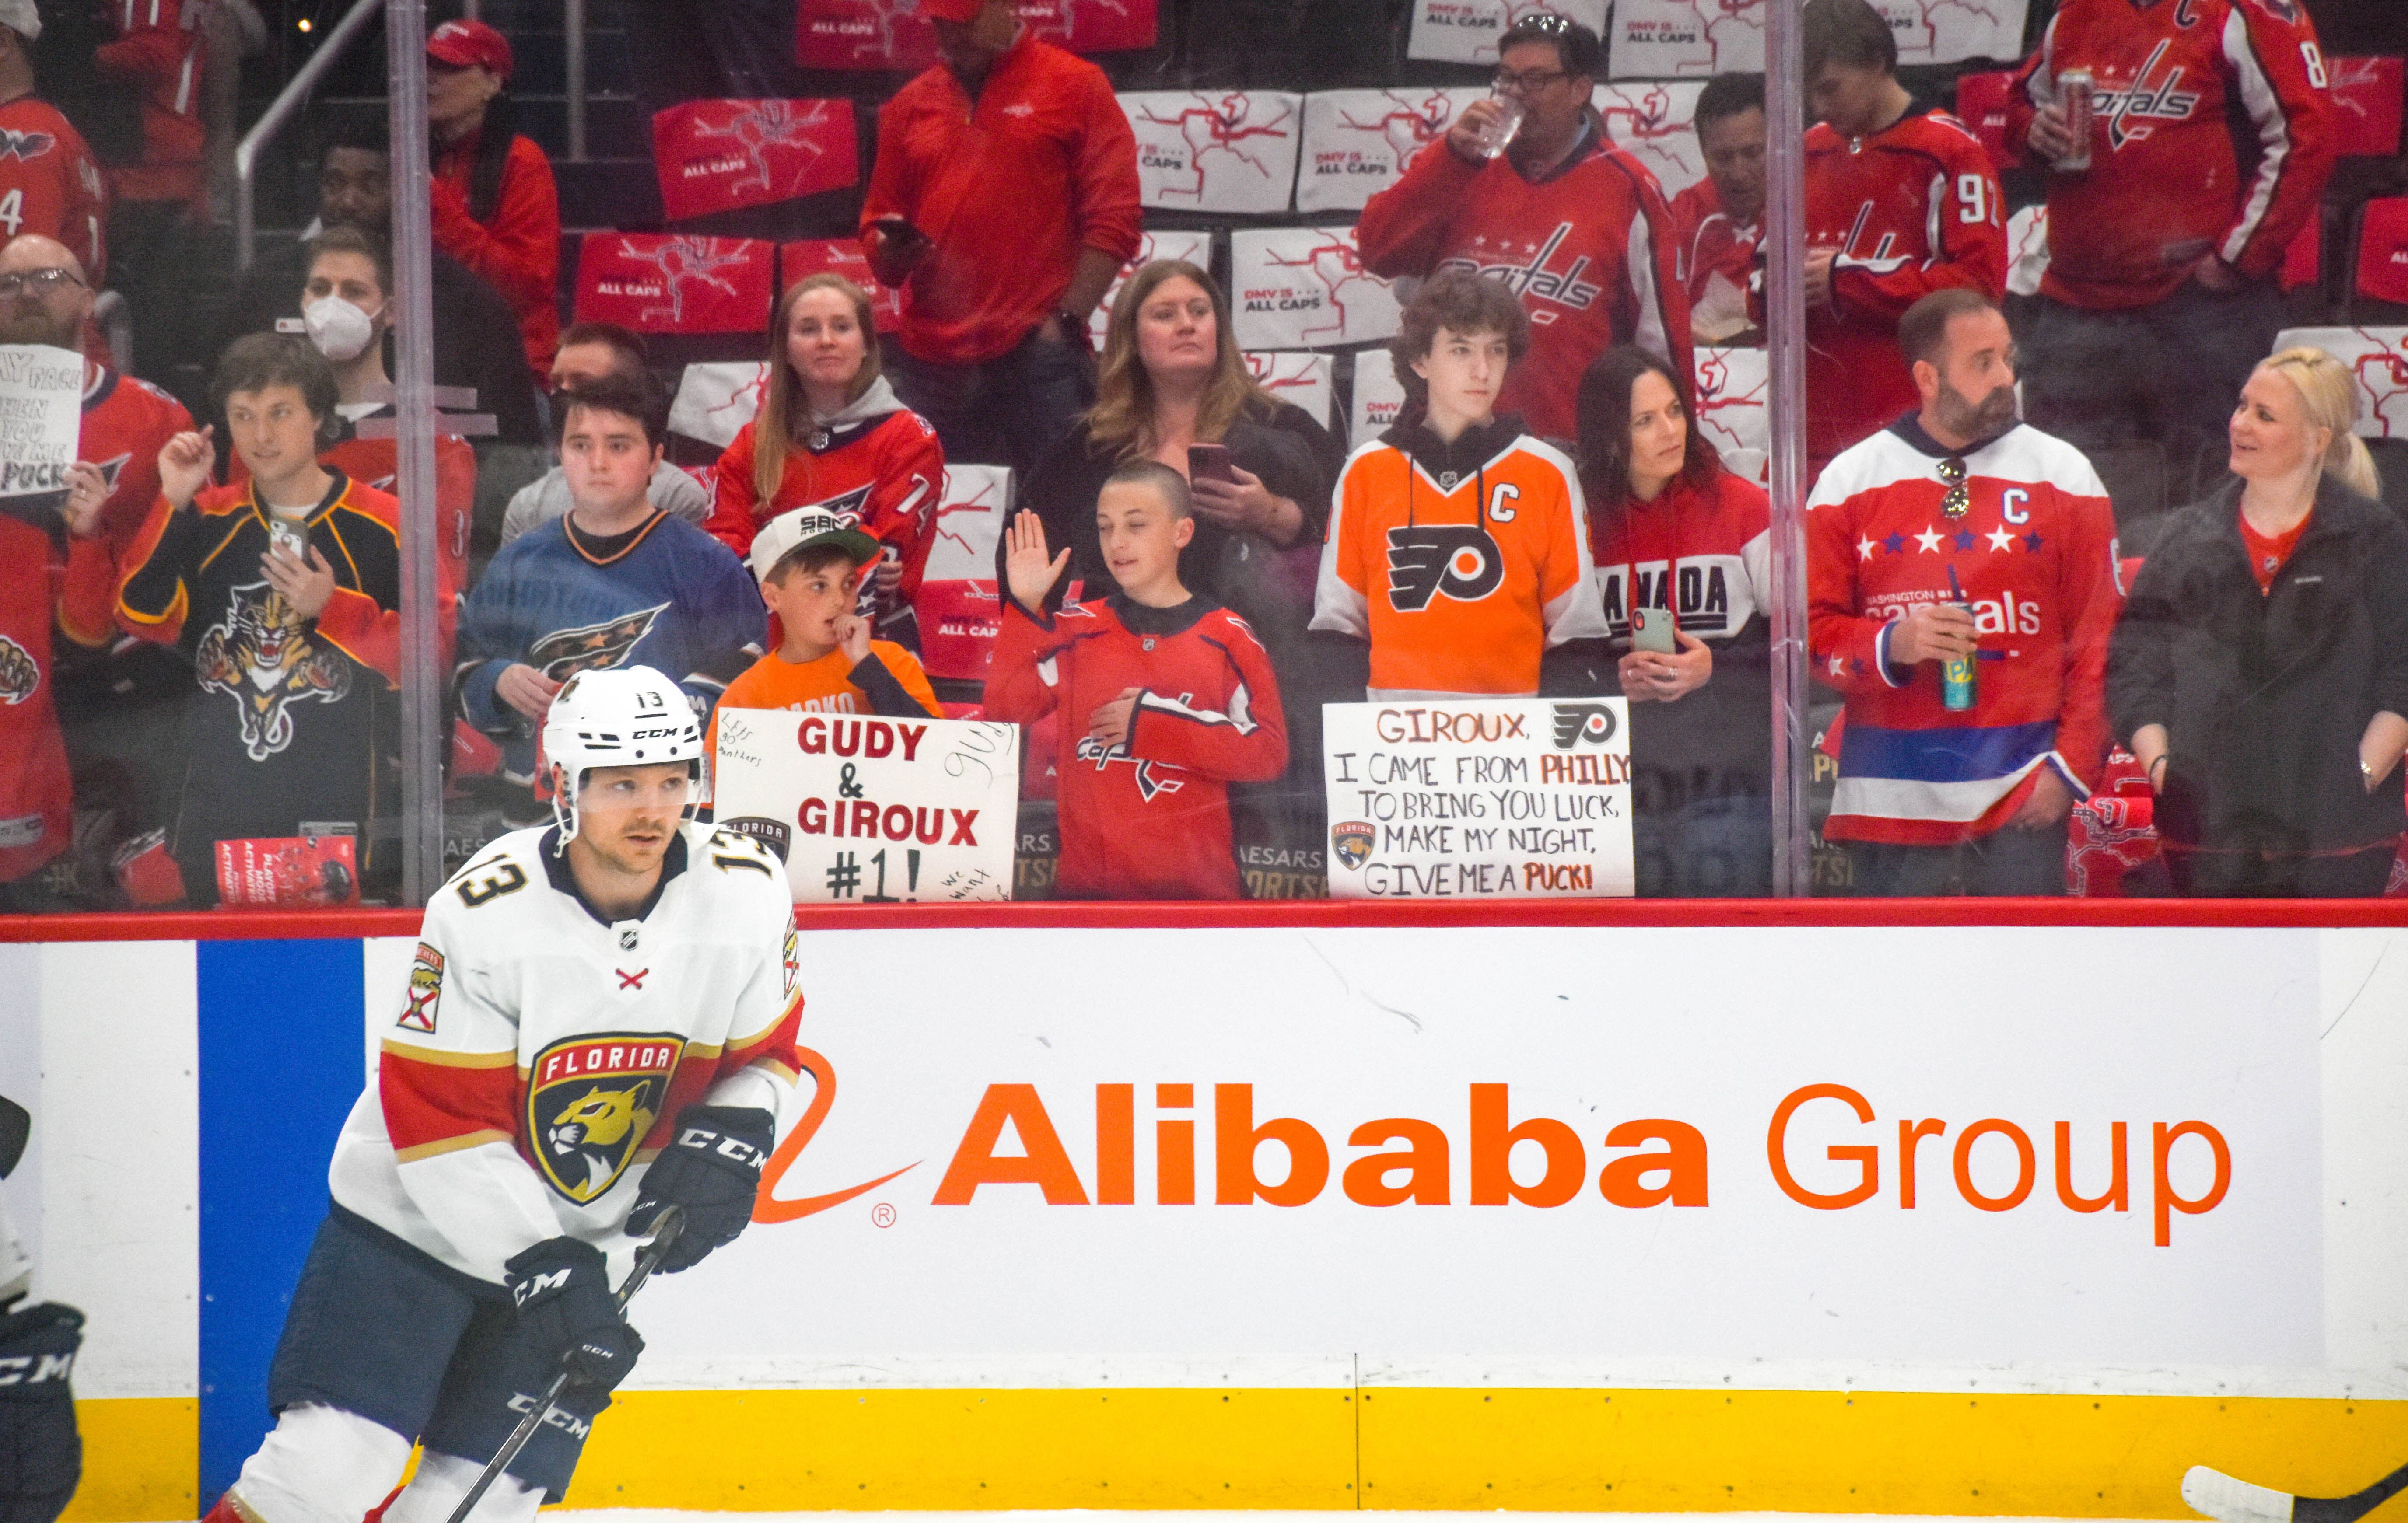 Former Flyers captain Claude Giroux enjoying new life, Stanley Cup run with Florida  Panthers